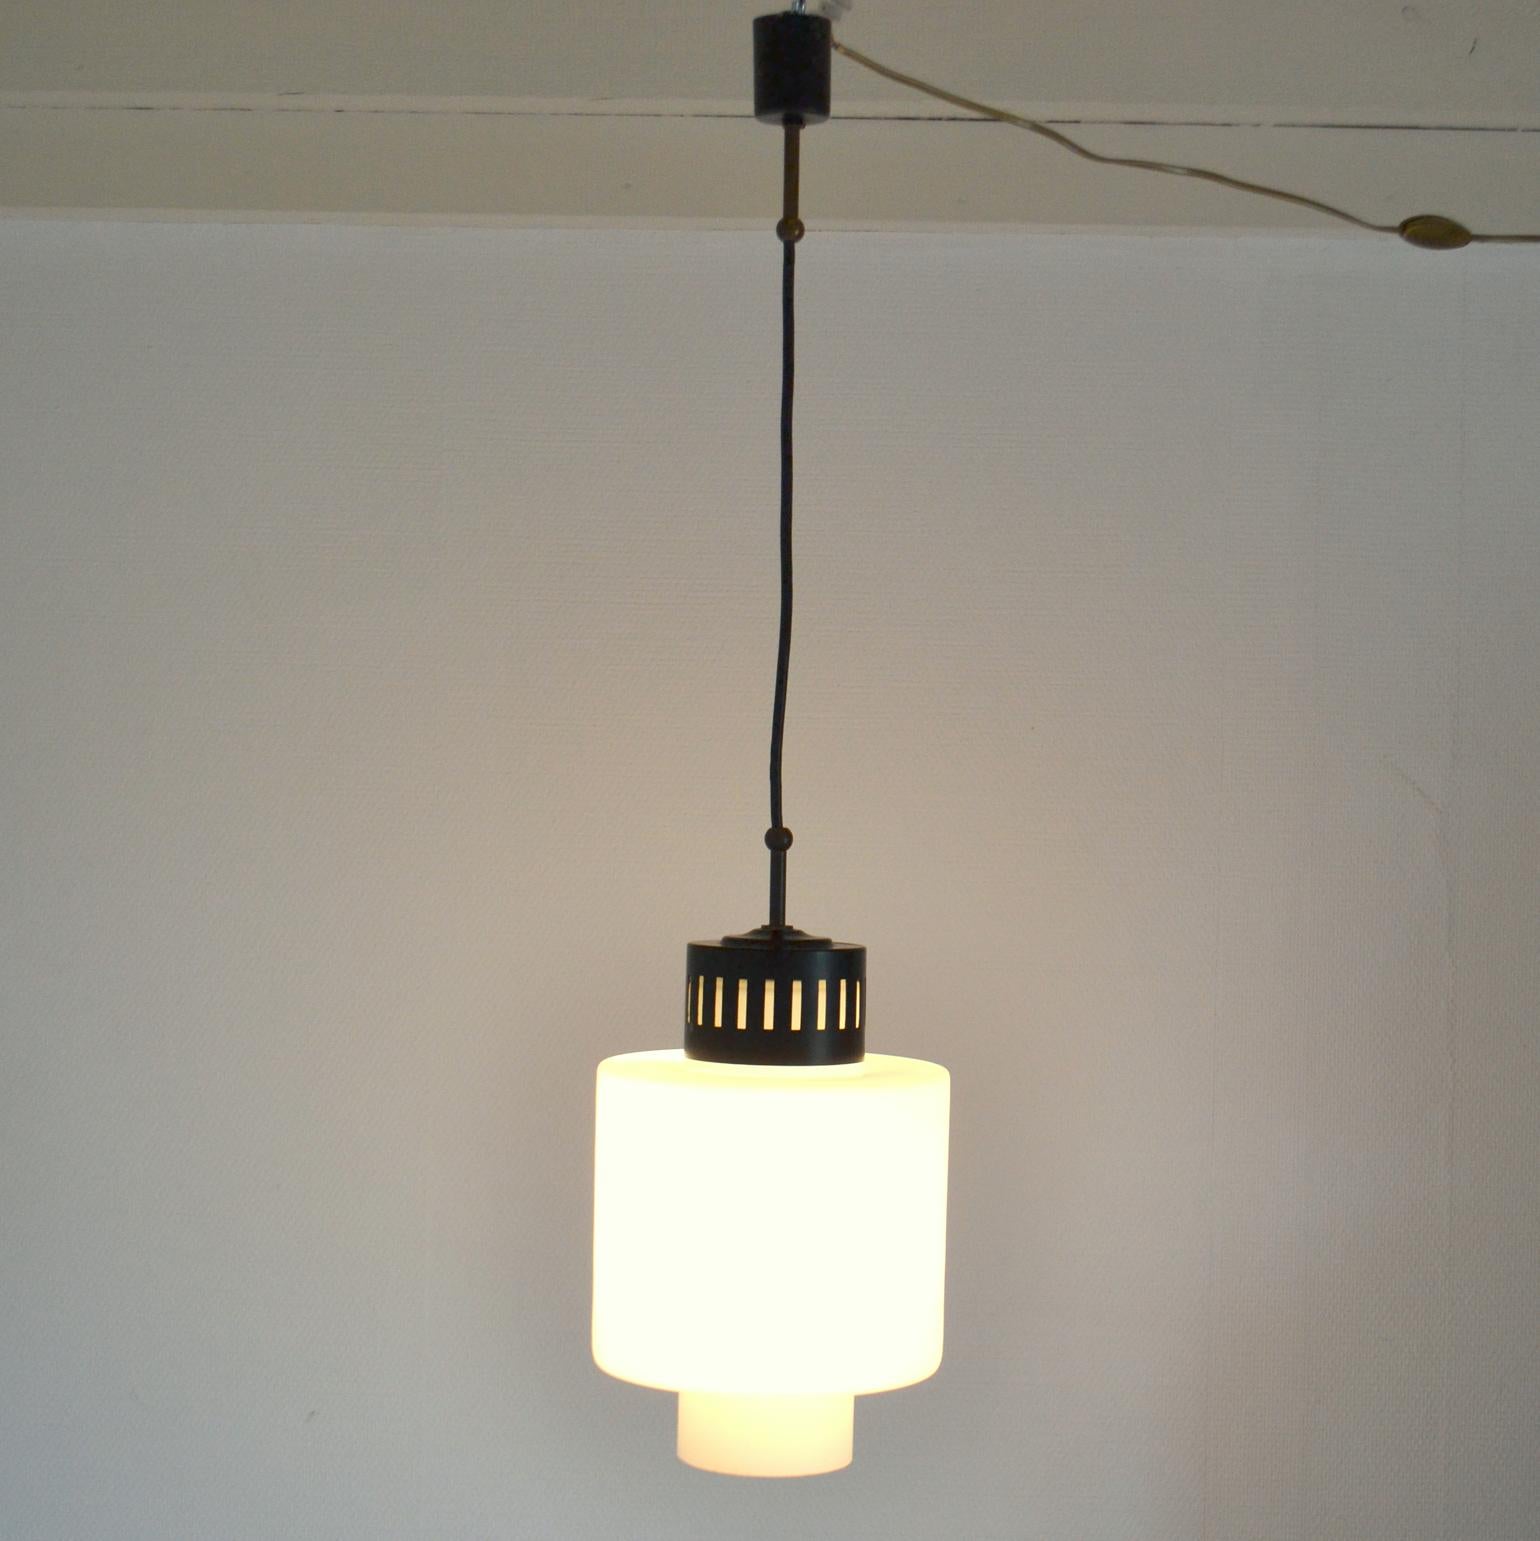 Classic Stilnovo 1960's pendant in milk glass edged with a metal rim hanging from a black metal and brass lamp holder.
This lamp is very functional for general light and most suitable for a small room.
Similar Stilnovo lamp available to combine in